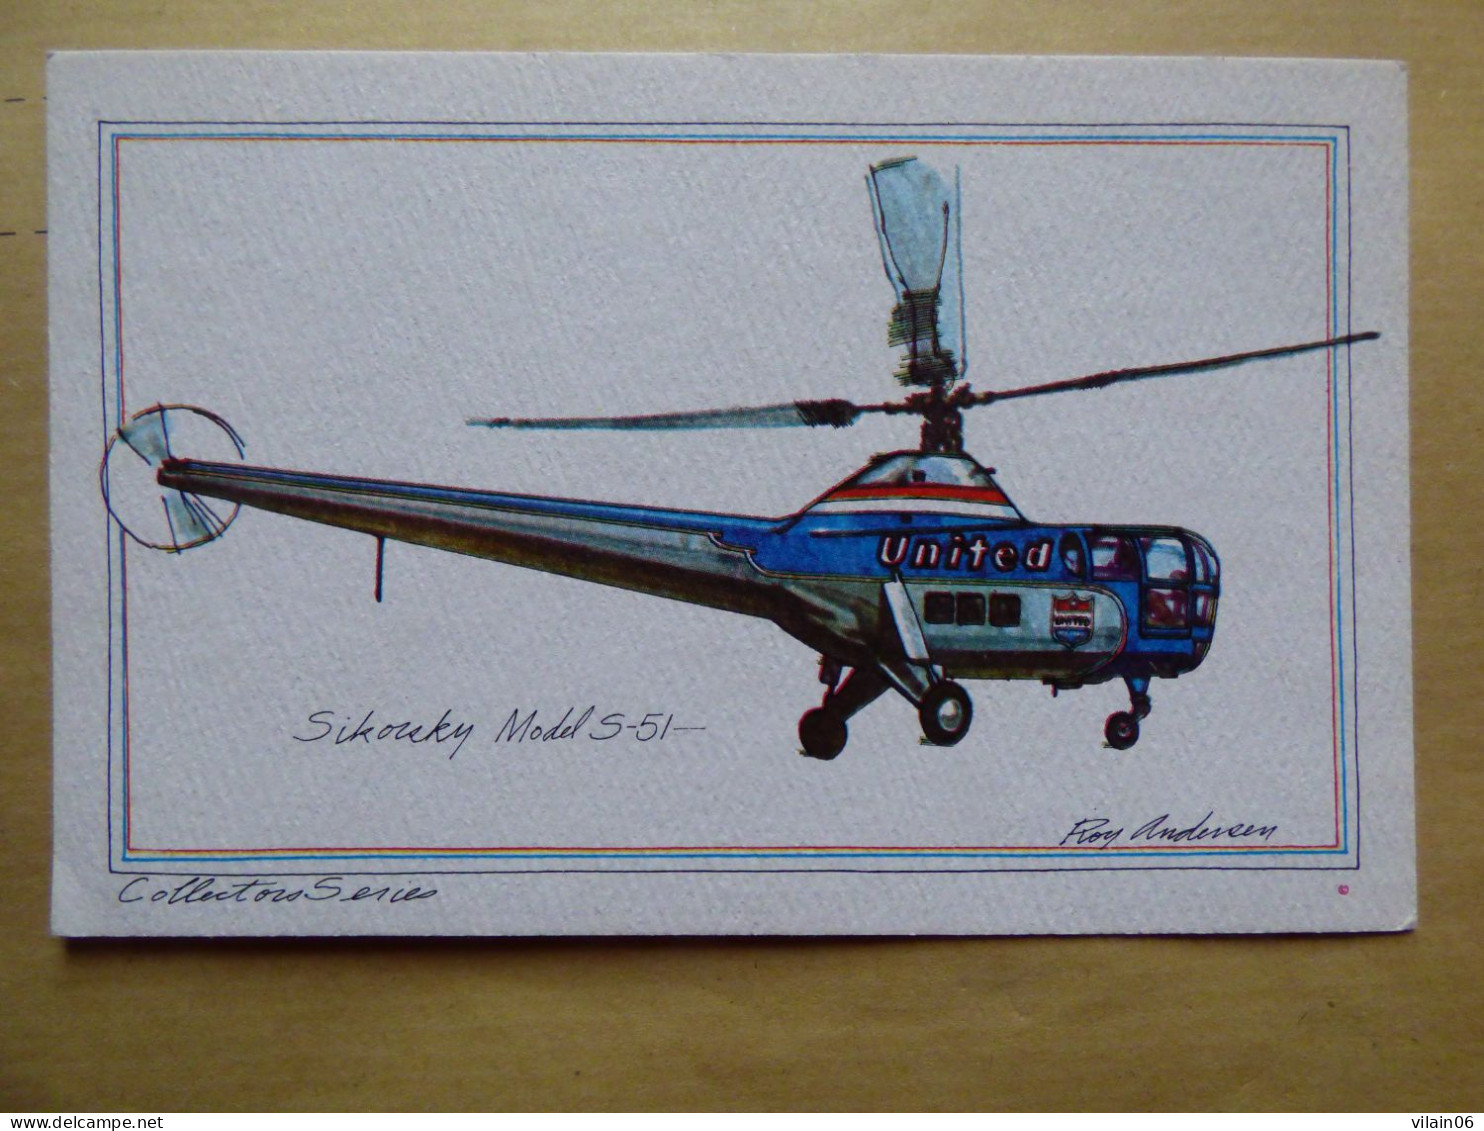 UNITED  SIKORSKY S-51  AIRLINES ISSUE / CARTE DE COMPAGNIE - Elicotteri